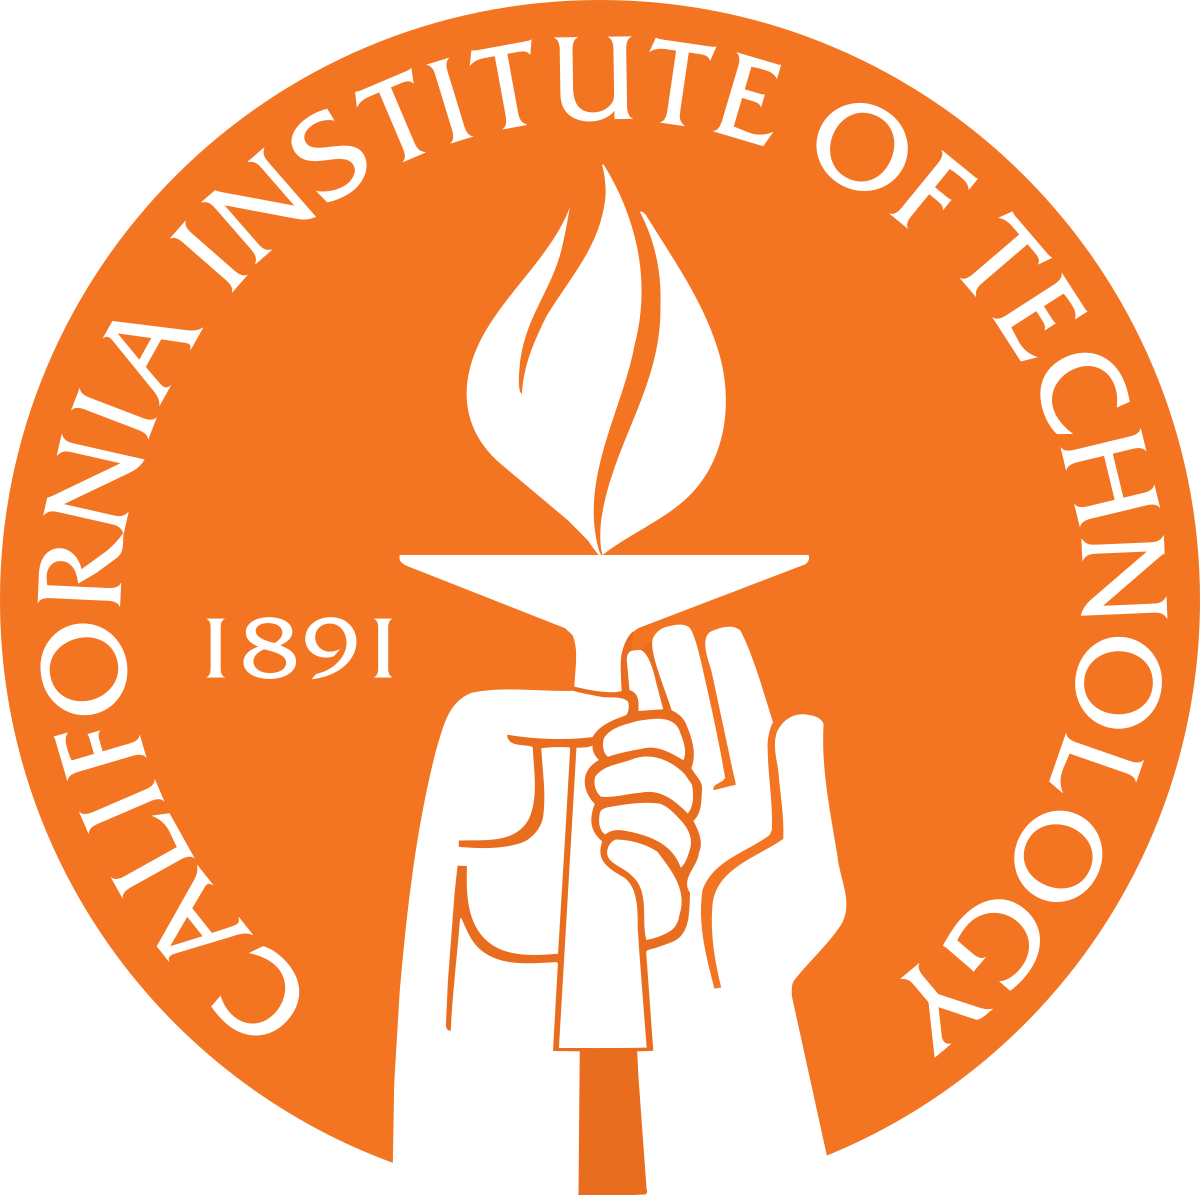 Famous Tech Logo - California Institute of Technology